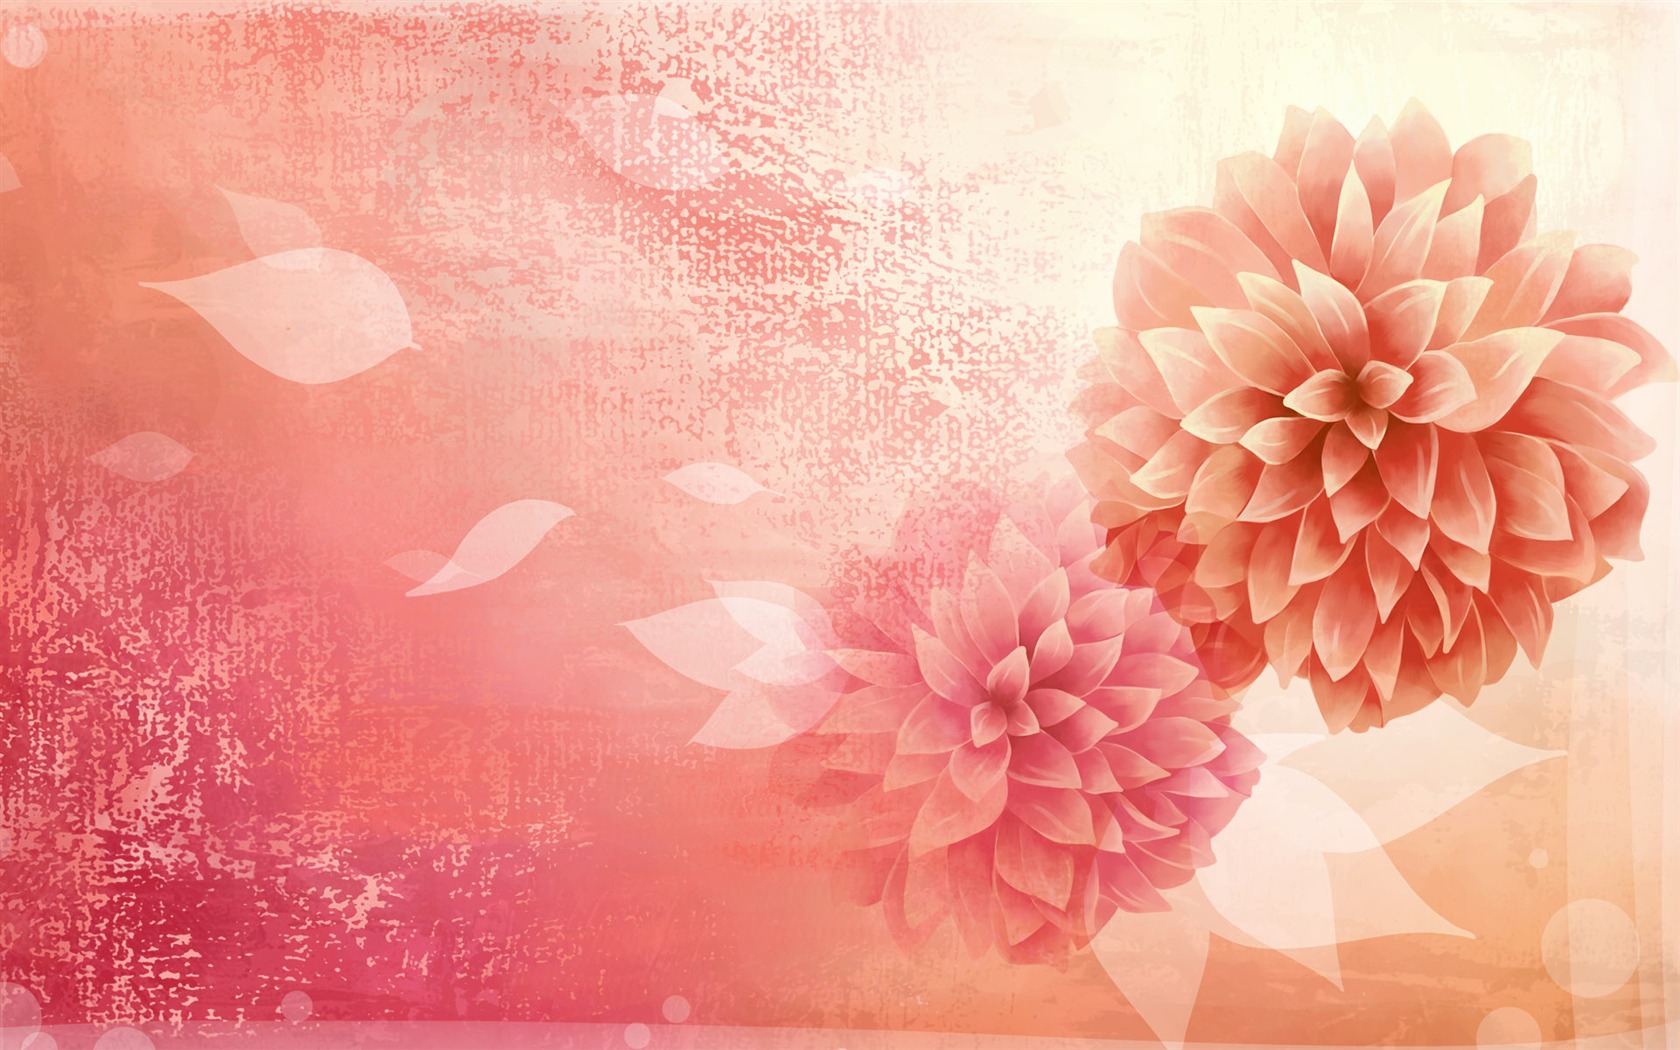 Synthetic Wallpaper Colorful Flower #22 - 1680x1050